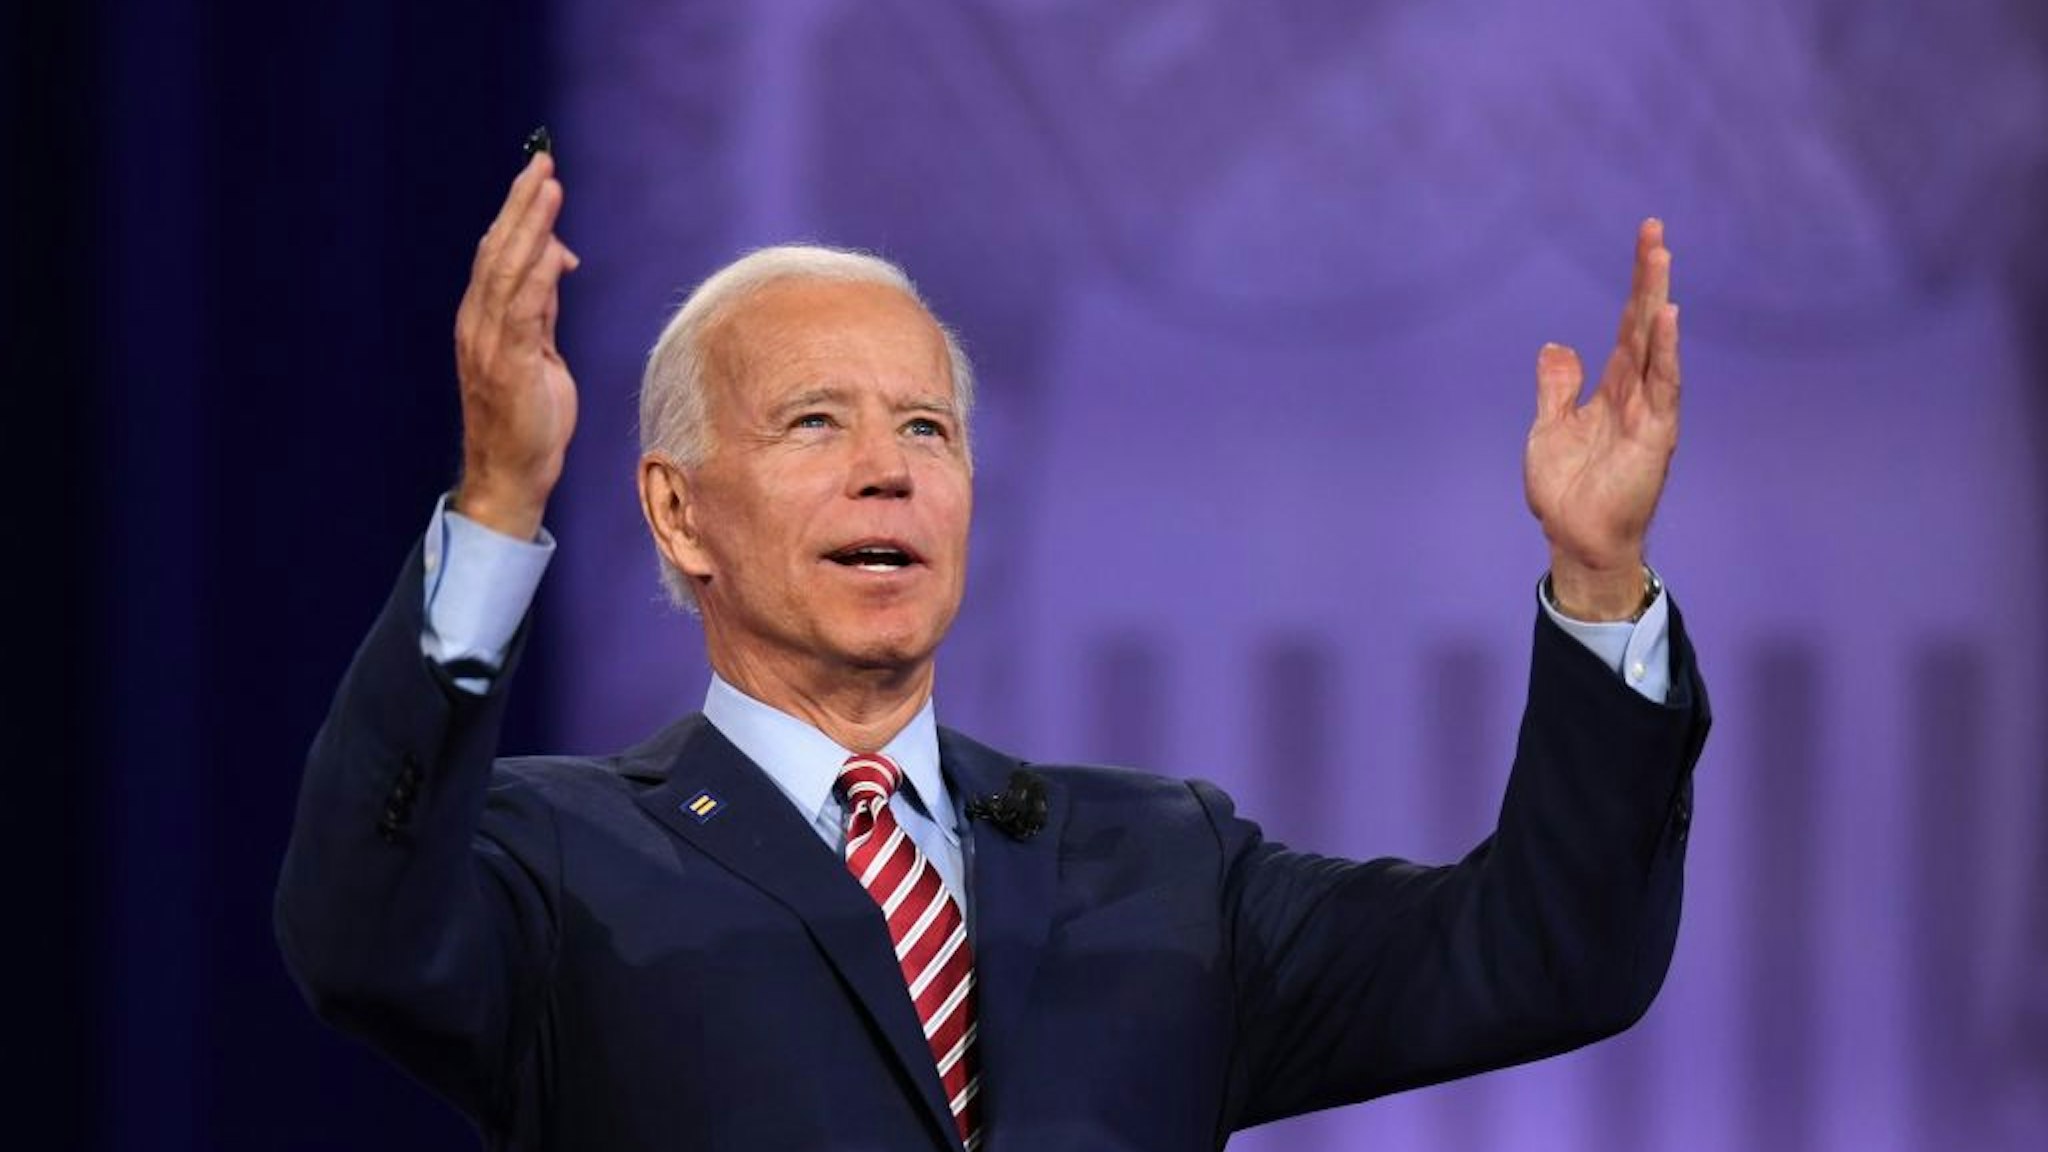 Joe Biden gestures as he speaks during a town hall devoted to LGBTQ issues